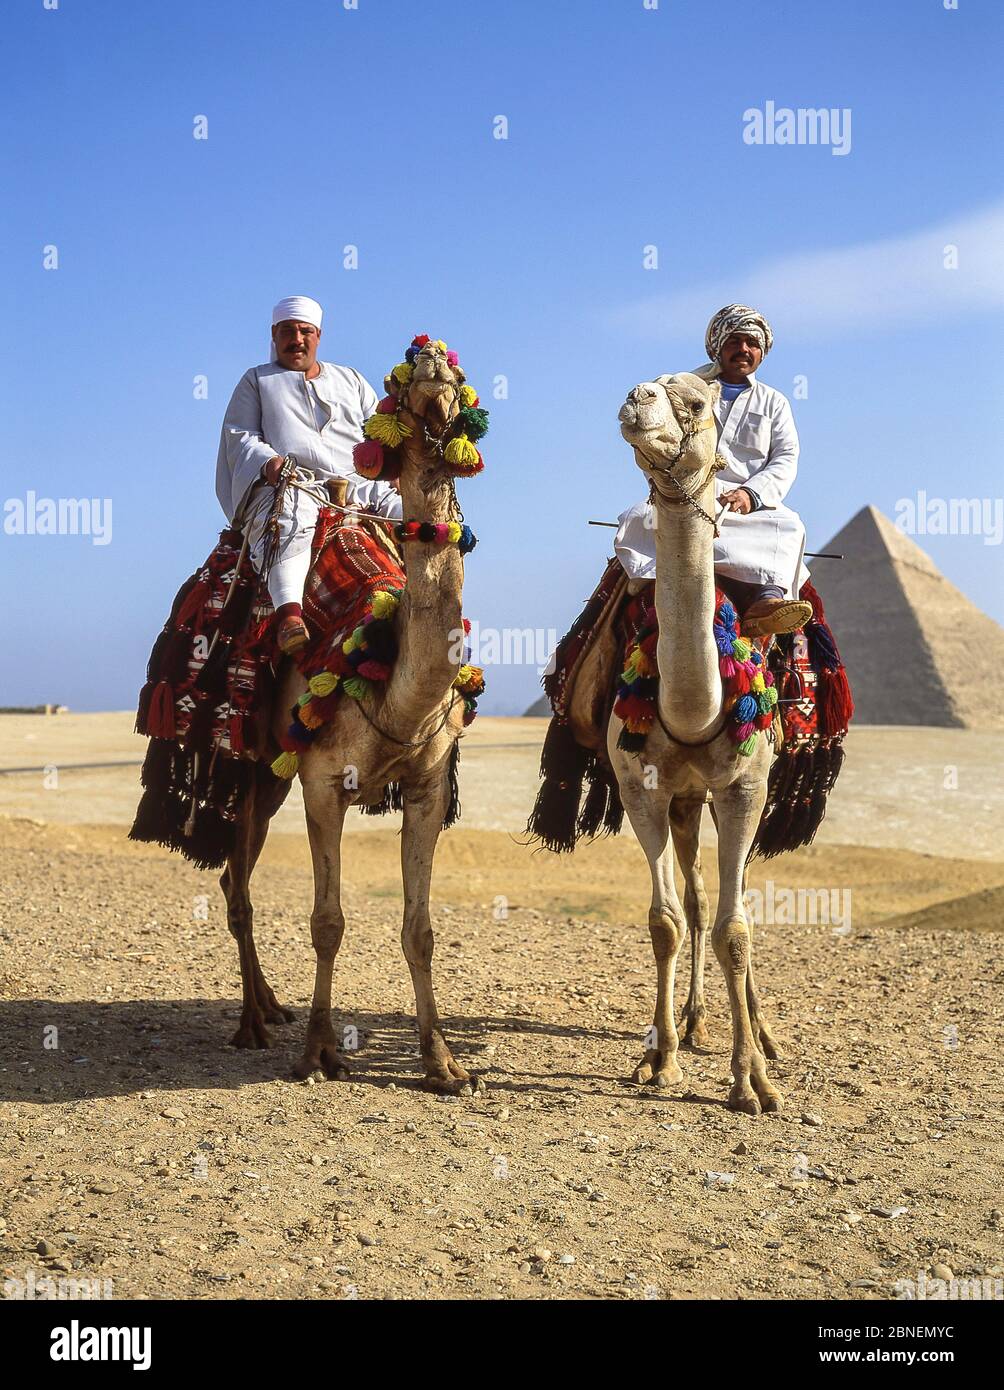 Camel drivers on camels, The Great Pyramids of Giza, Giza, Giza Governate, Republic of Egypt Stock Photo